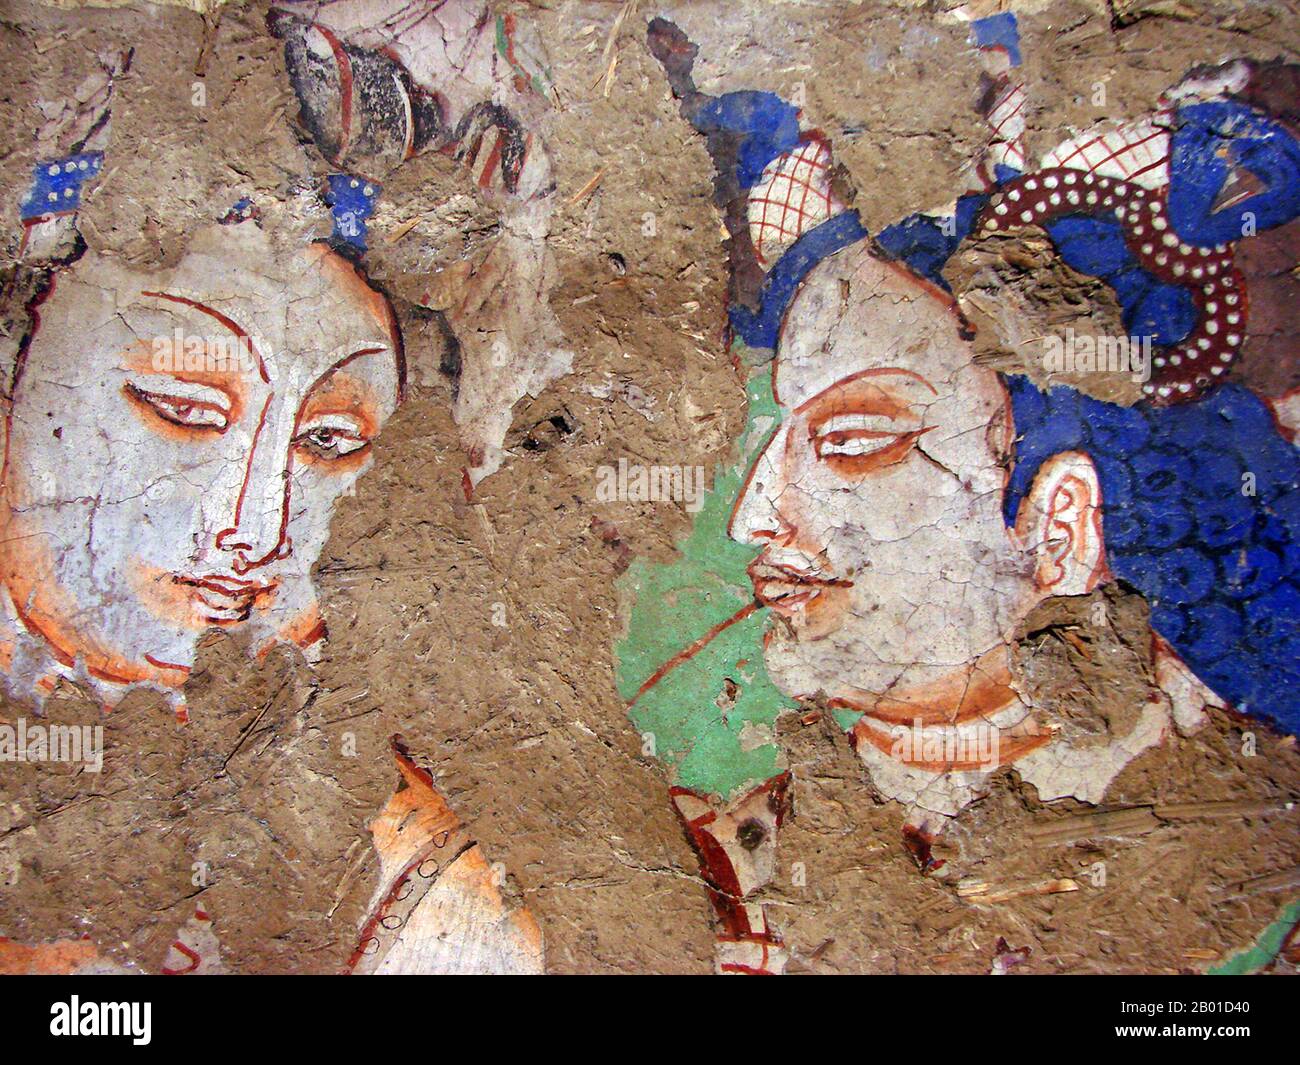 China: Devotees listening to a sermon of the Buddha, mural from Kizil Thousand Buddha Caves, Kuqa, Xinjiang, 6th-7th century CE.  The Kizil Caves (Qizil Ming Oy; Kizil Cave of a Thousand Buddhas) are 236 Buddhist rock-cut caves located near Kizil Township in Xinjiang. The site is located on the northern bank of the Muzat River 75 kilometres by road northwest of Kucha (Kuqa). This area was a commercial hub of the Silk Road.  The caves are said to be the earliest major Buddhist cave complex in Xinjiang, with development occurring between the 3rd and 8th centuries. Stock Photo